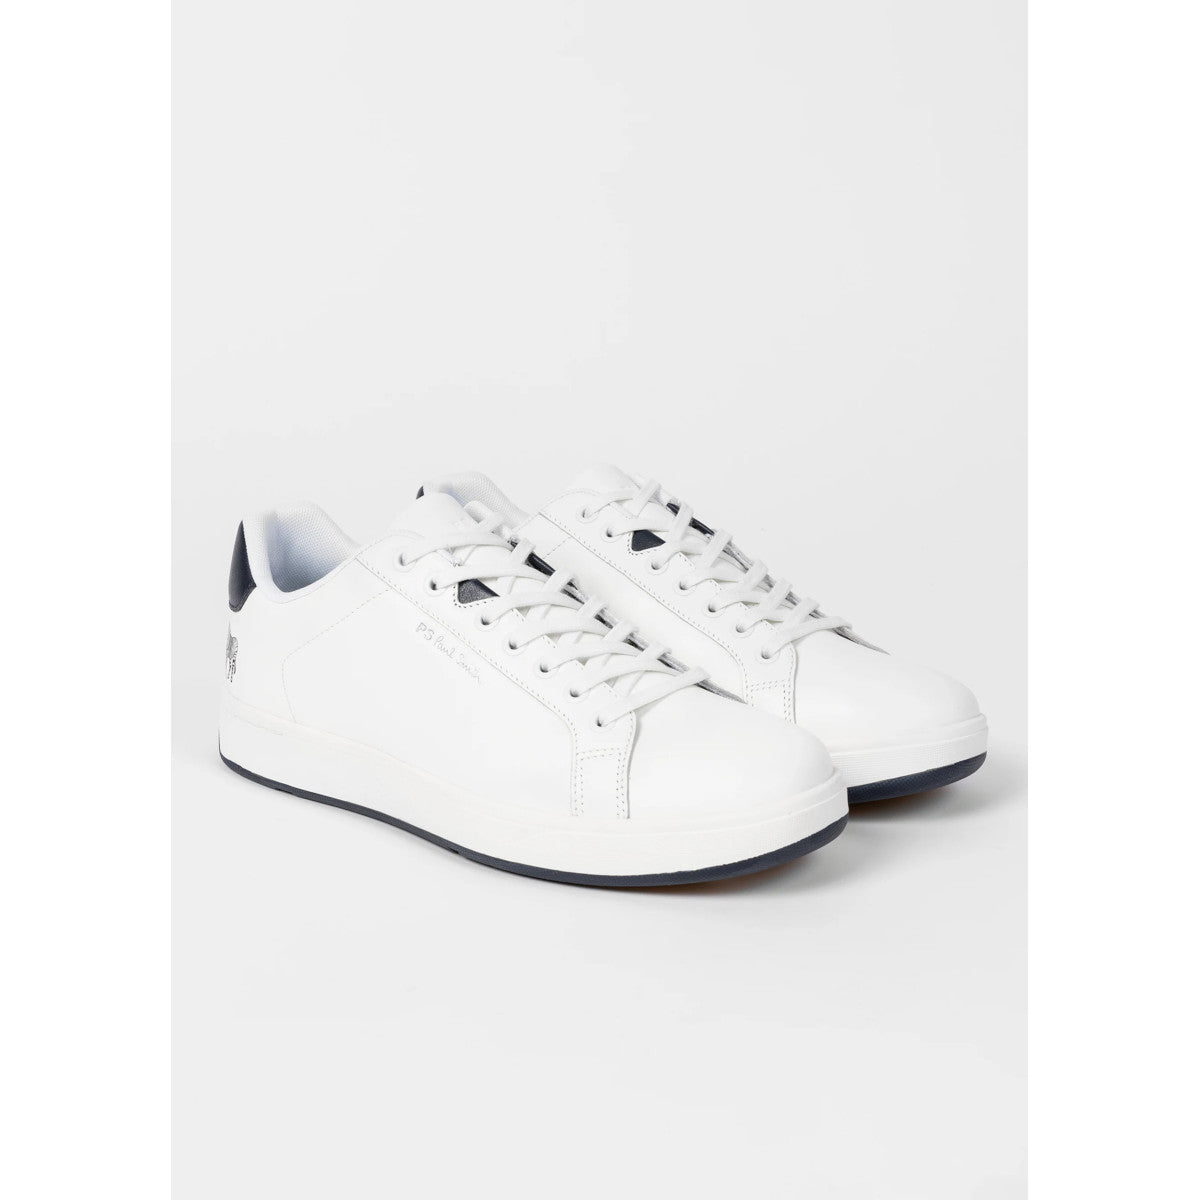 PS Paul Smith Albany Sneaker 01 WHITE